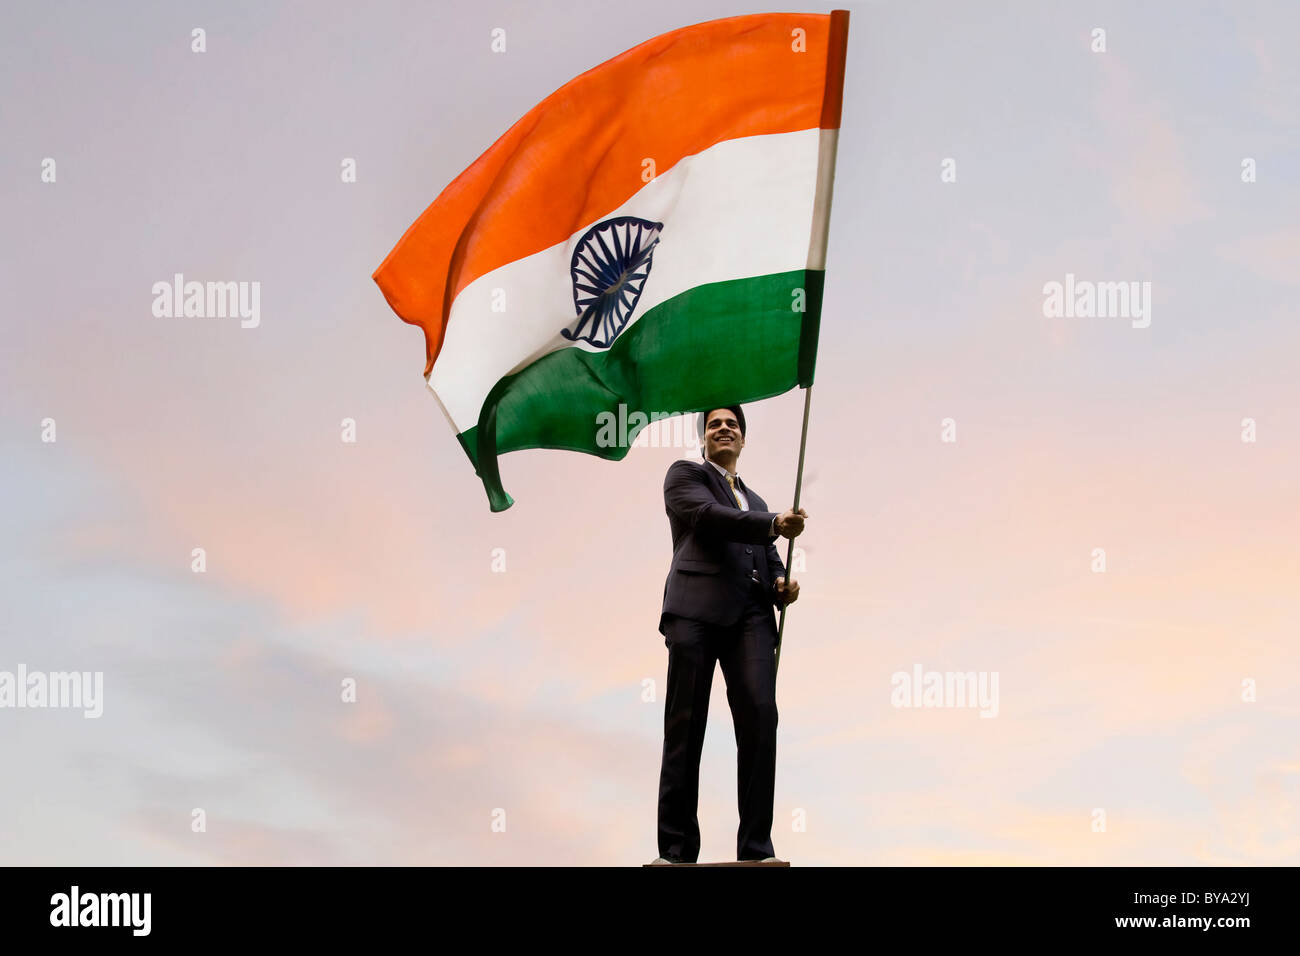 Indian Flag Color High Resolution Stock Photography and Images - Alamy